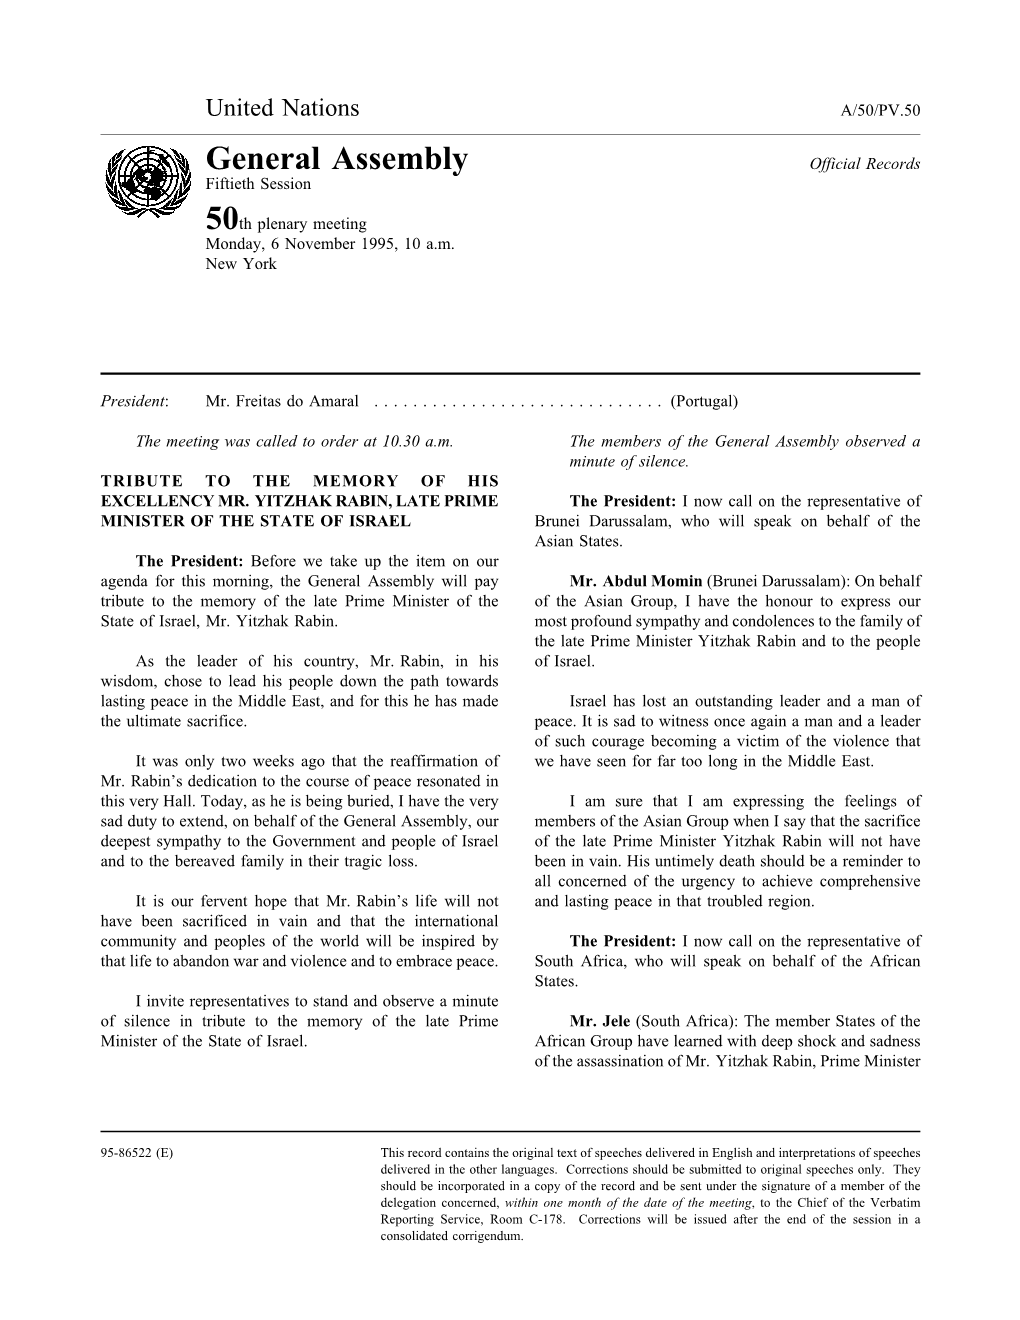 General Assembly Official Records Fiftieth Session